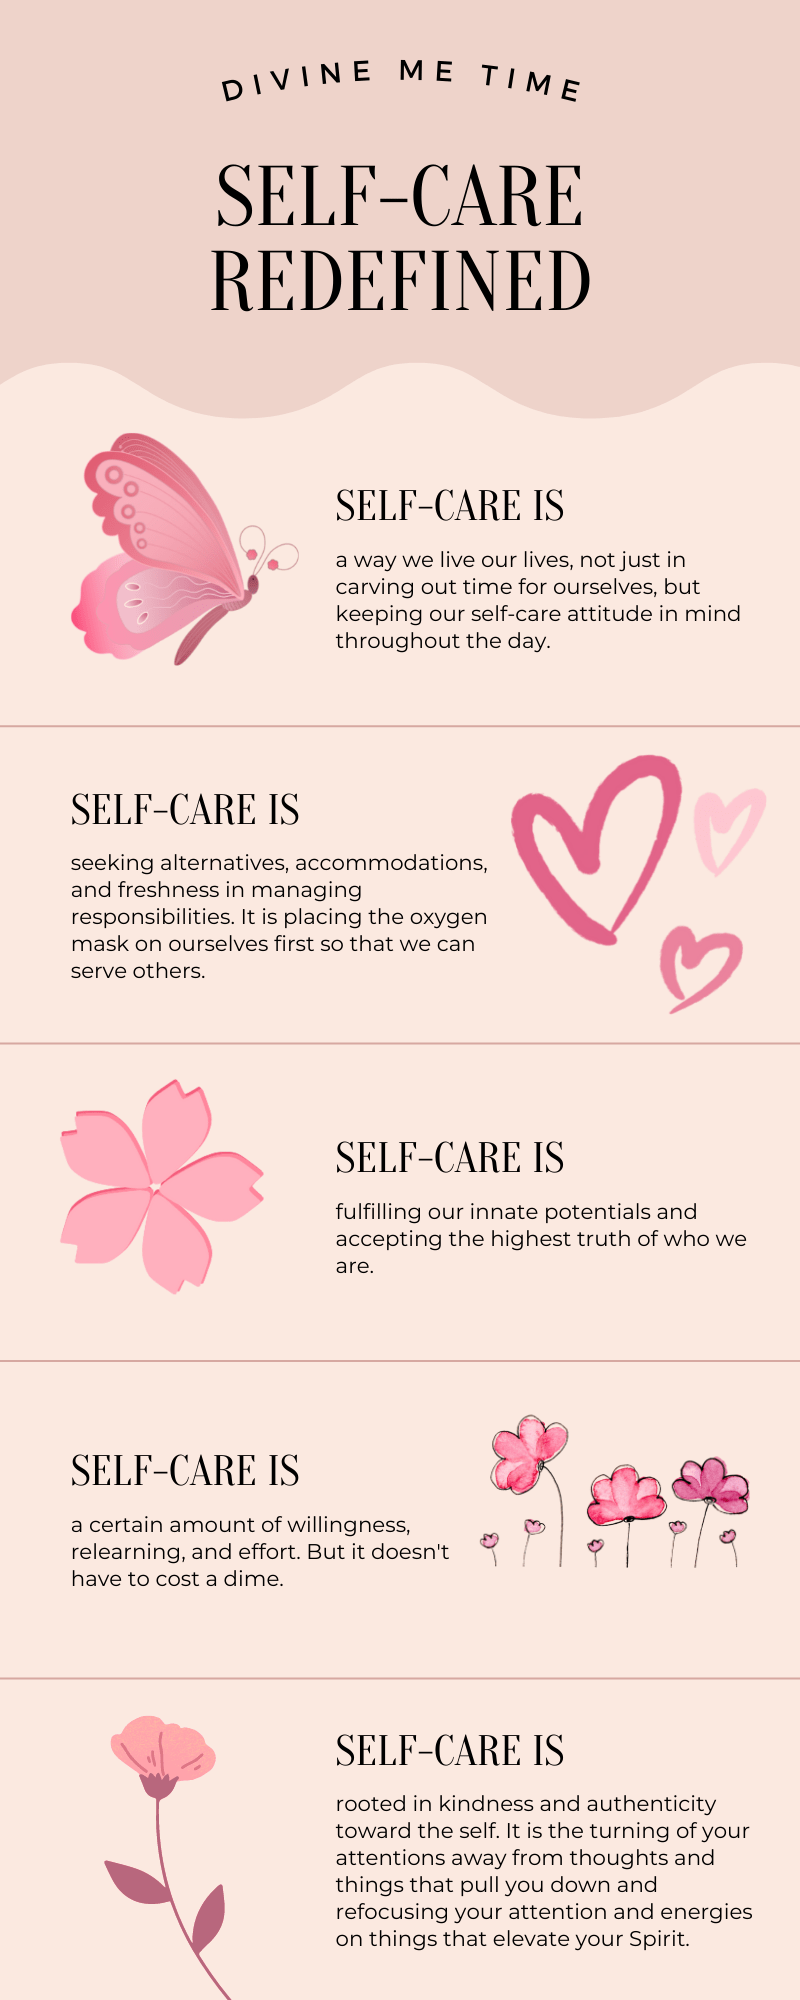 Self-care Redefined